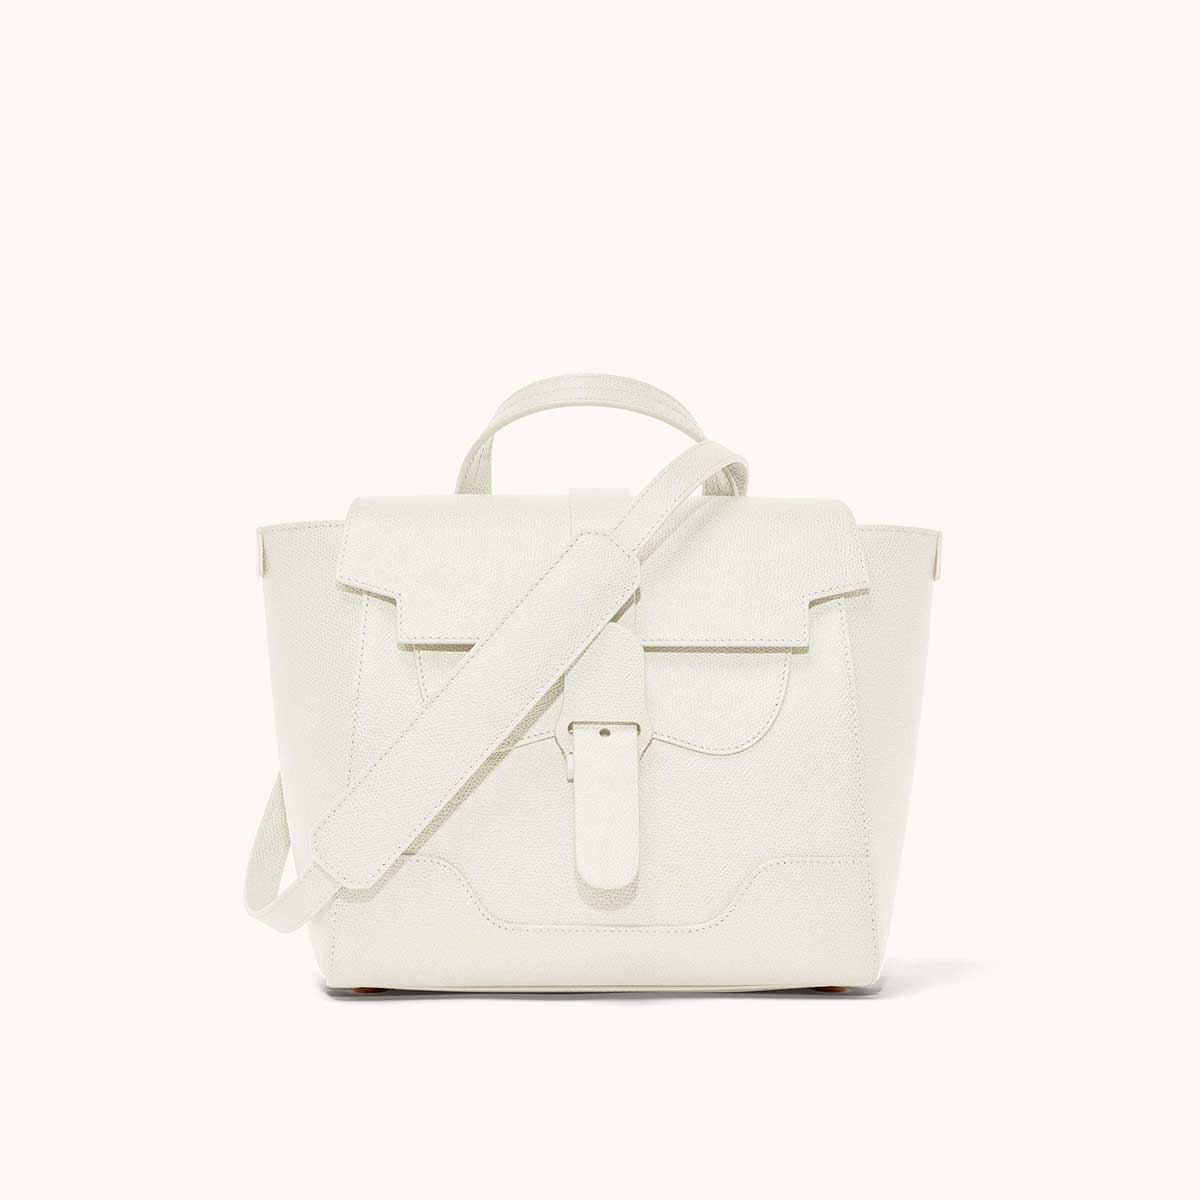 Midi Maestra Bag Pebbled Cream with Silver Hardware Front View with long strap draped over top